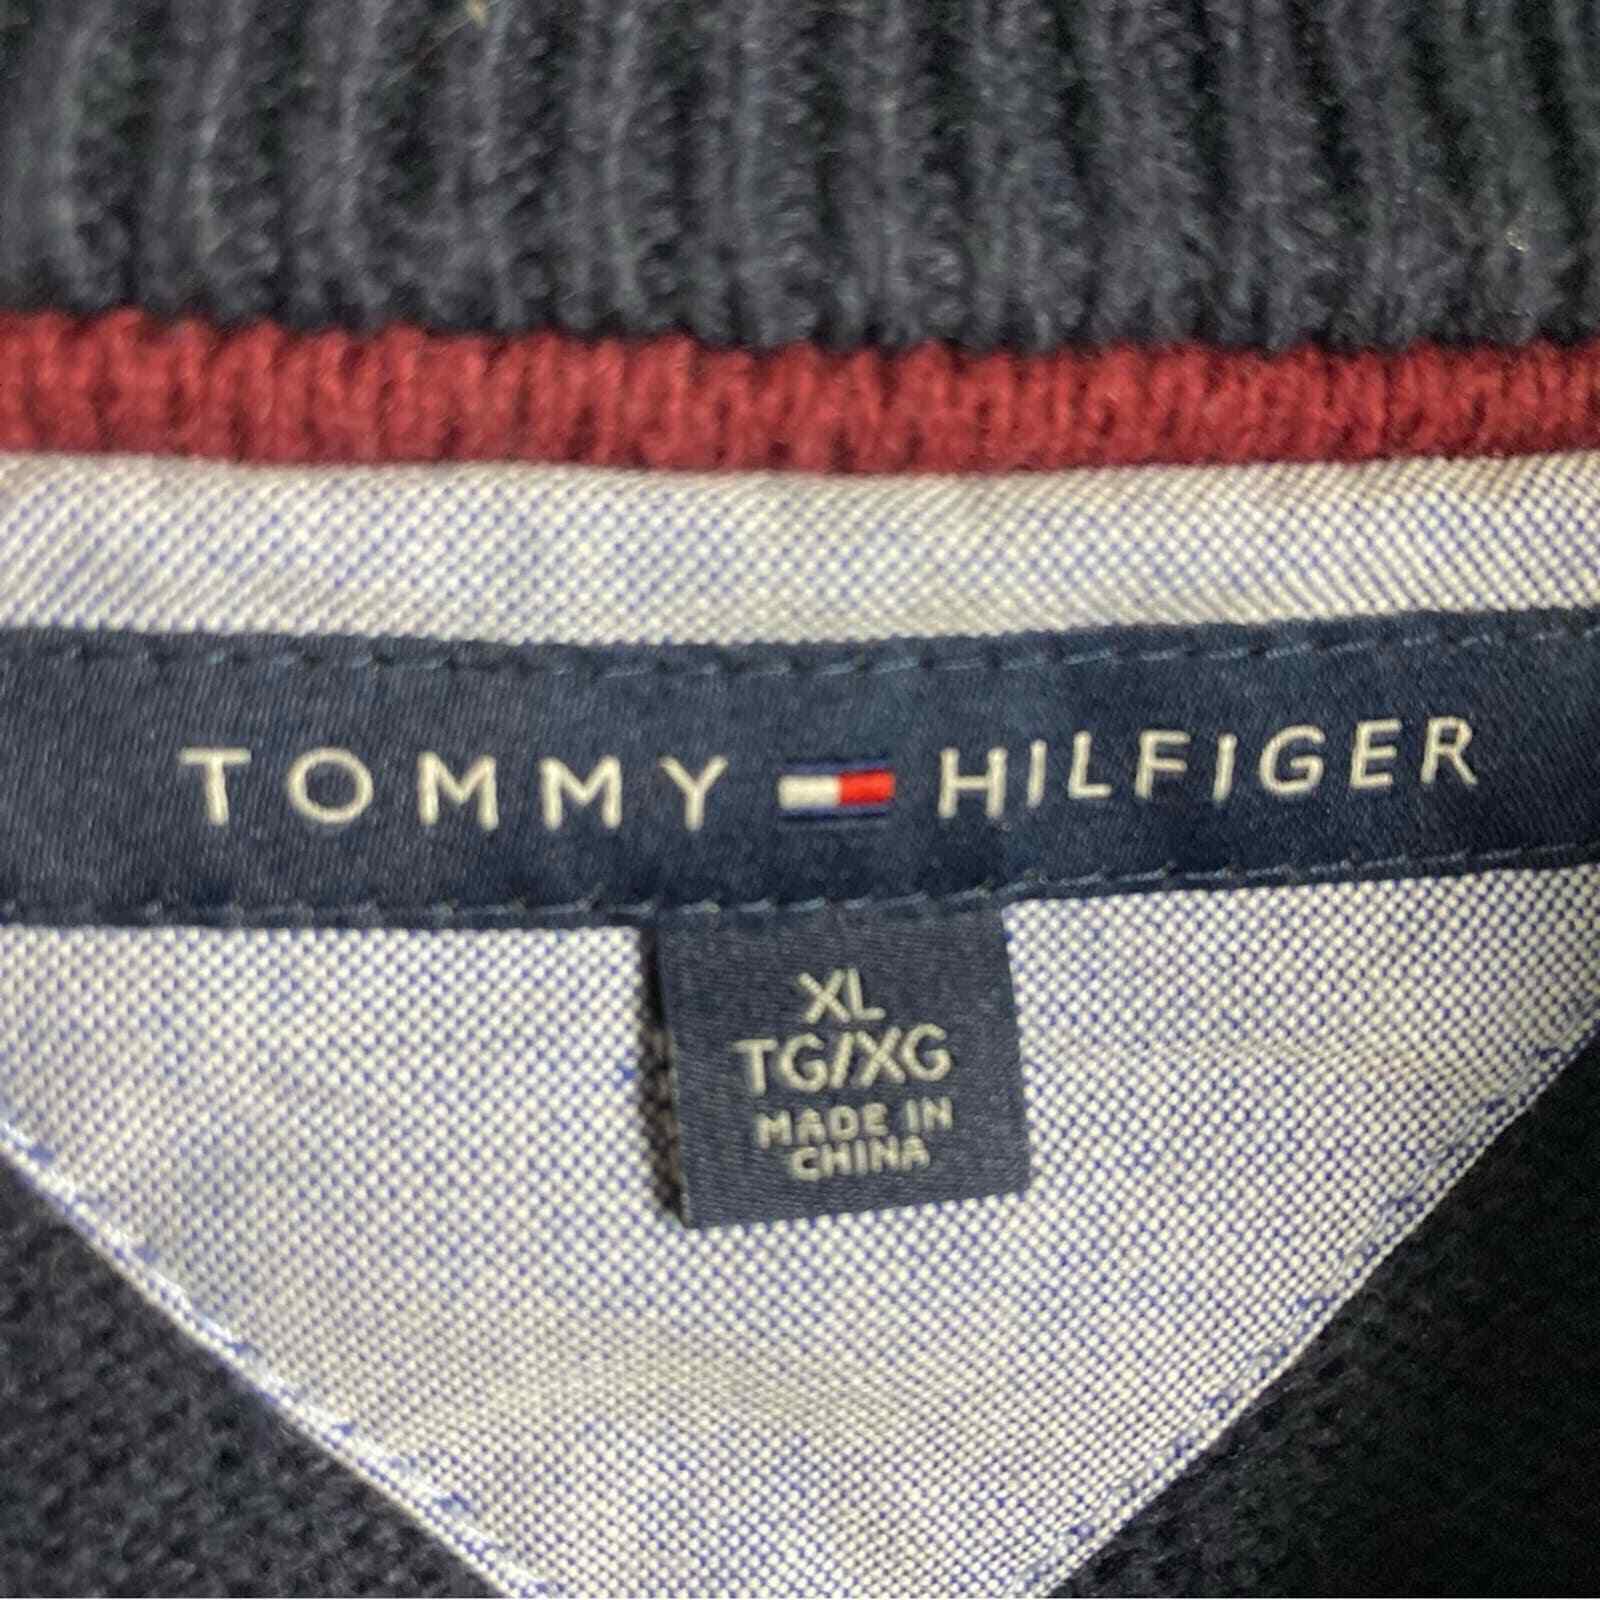 Tommy Hilfiger sweater men's extra large Fair Isl… - image 9